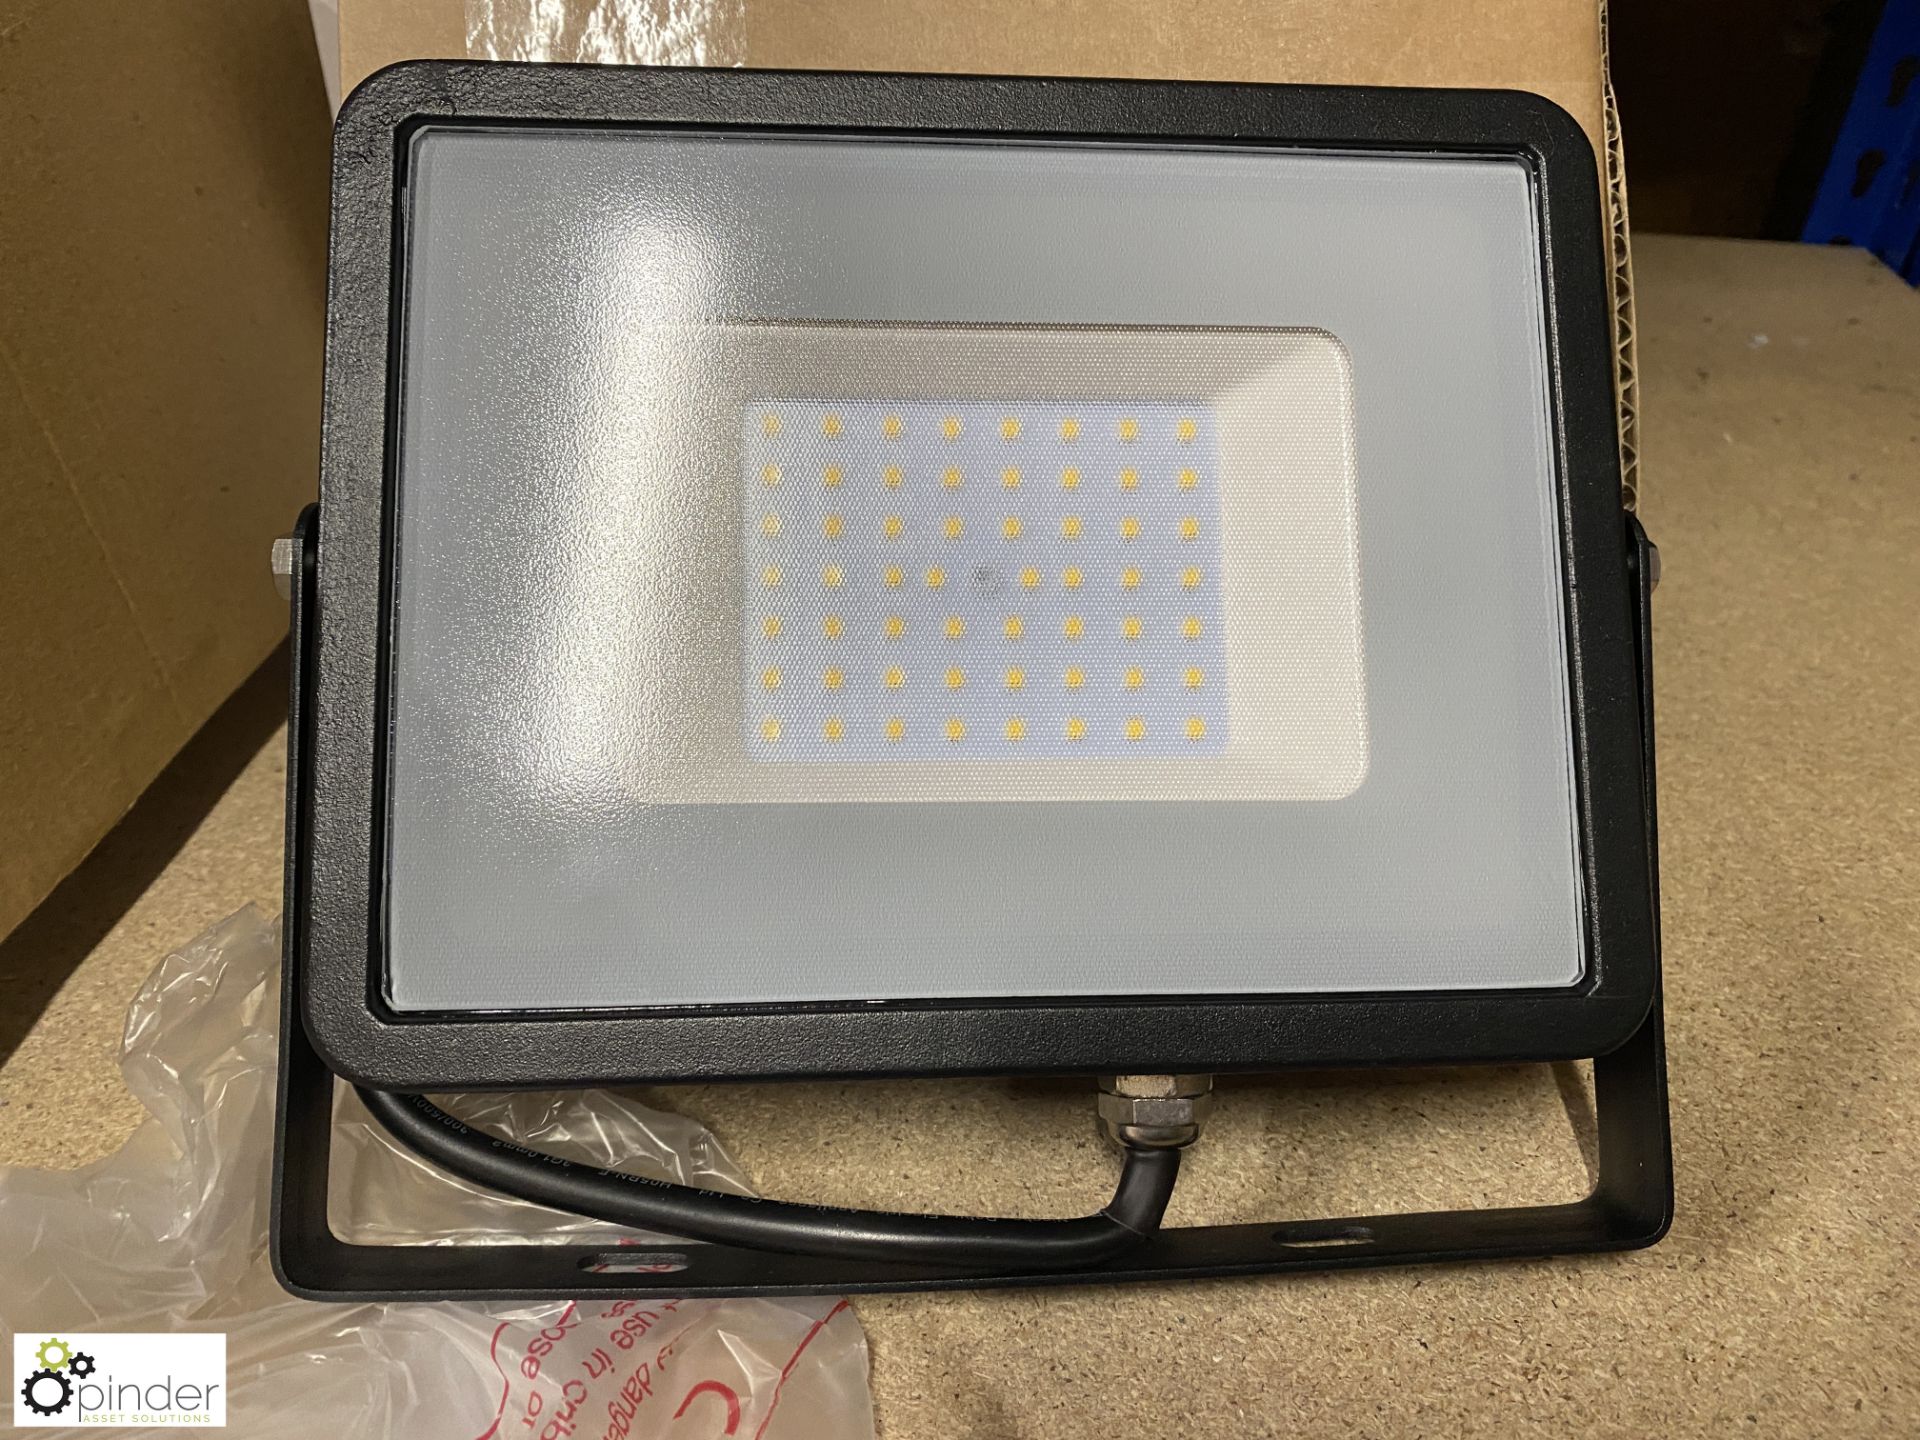 Approx 60 50w Floodlights, black, product code T4FLV4000B